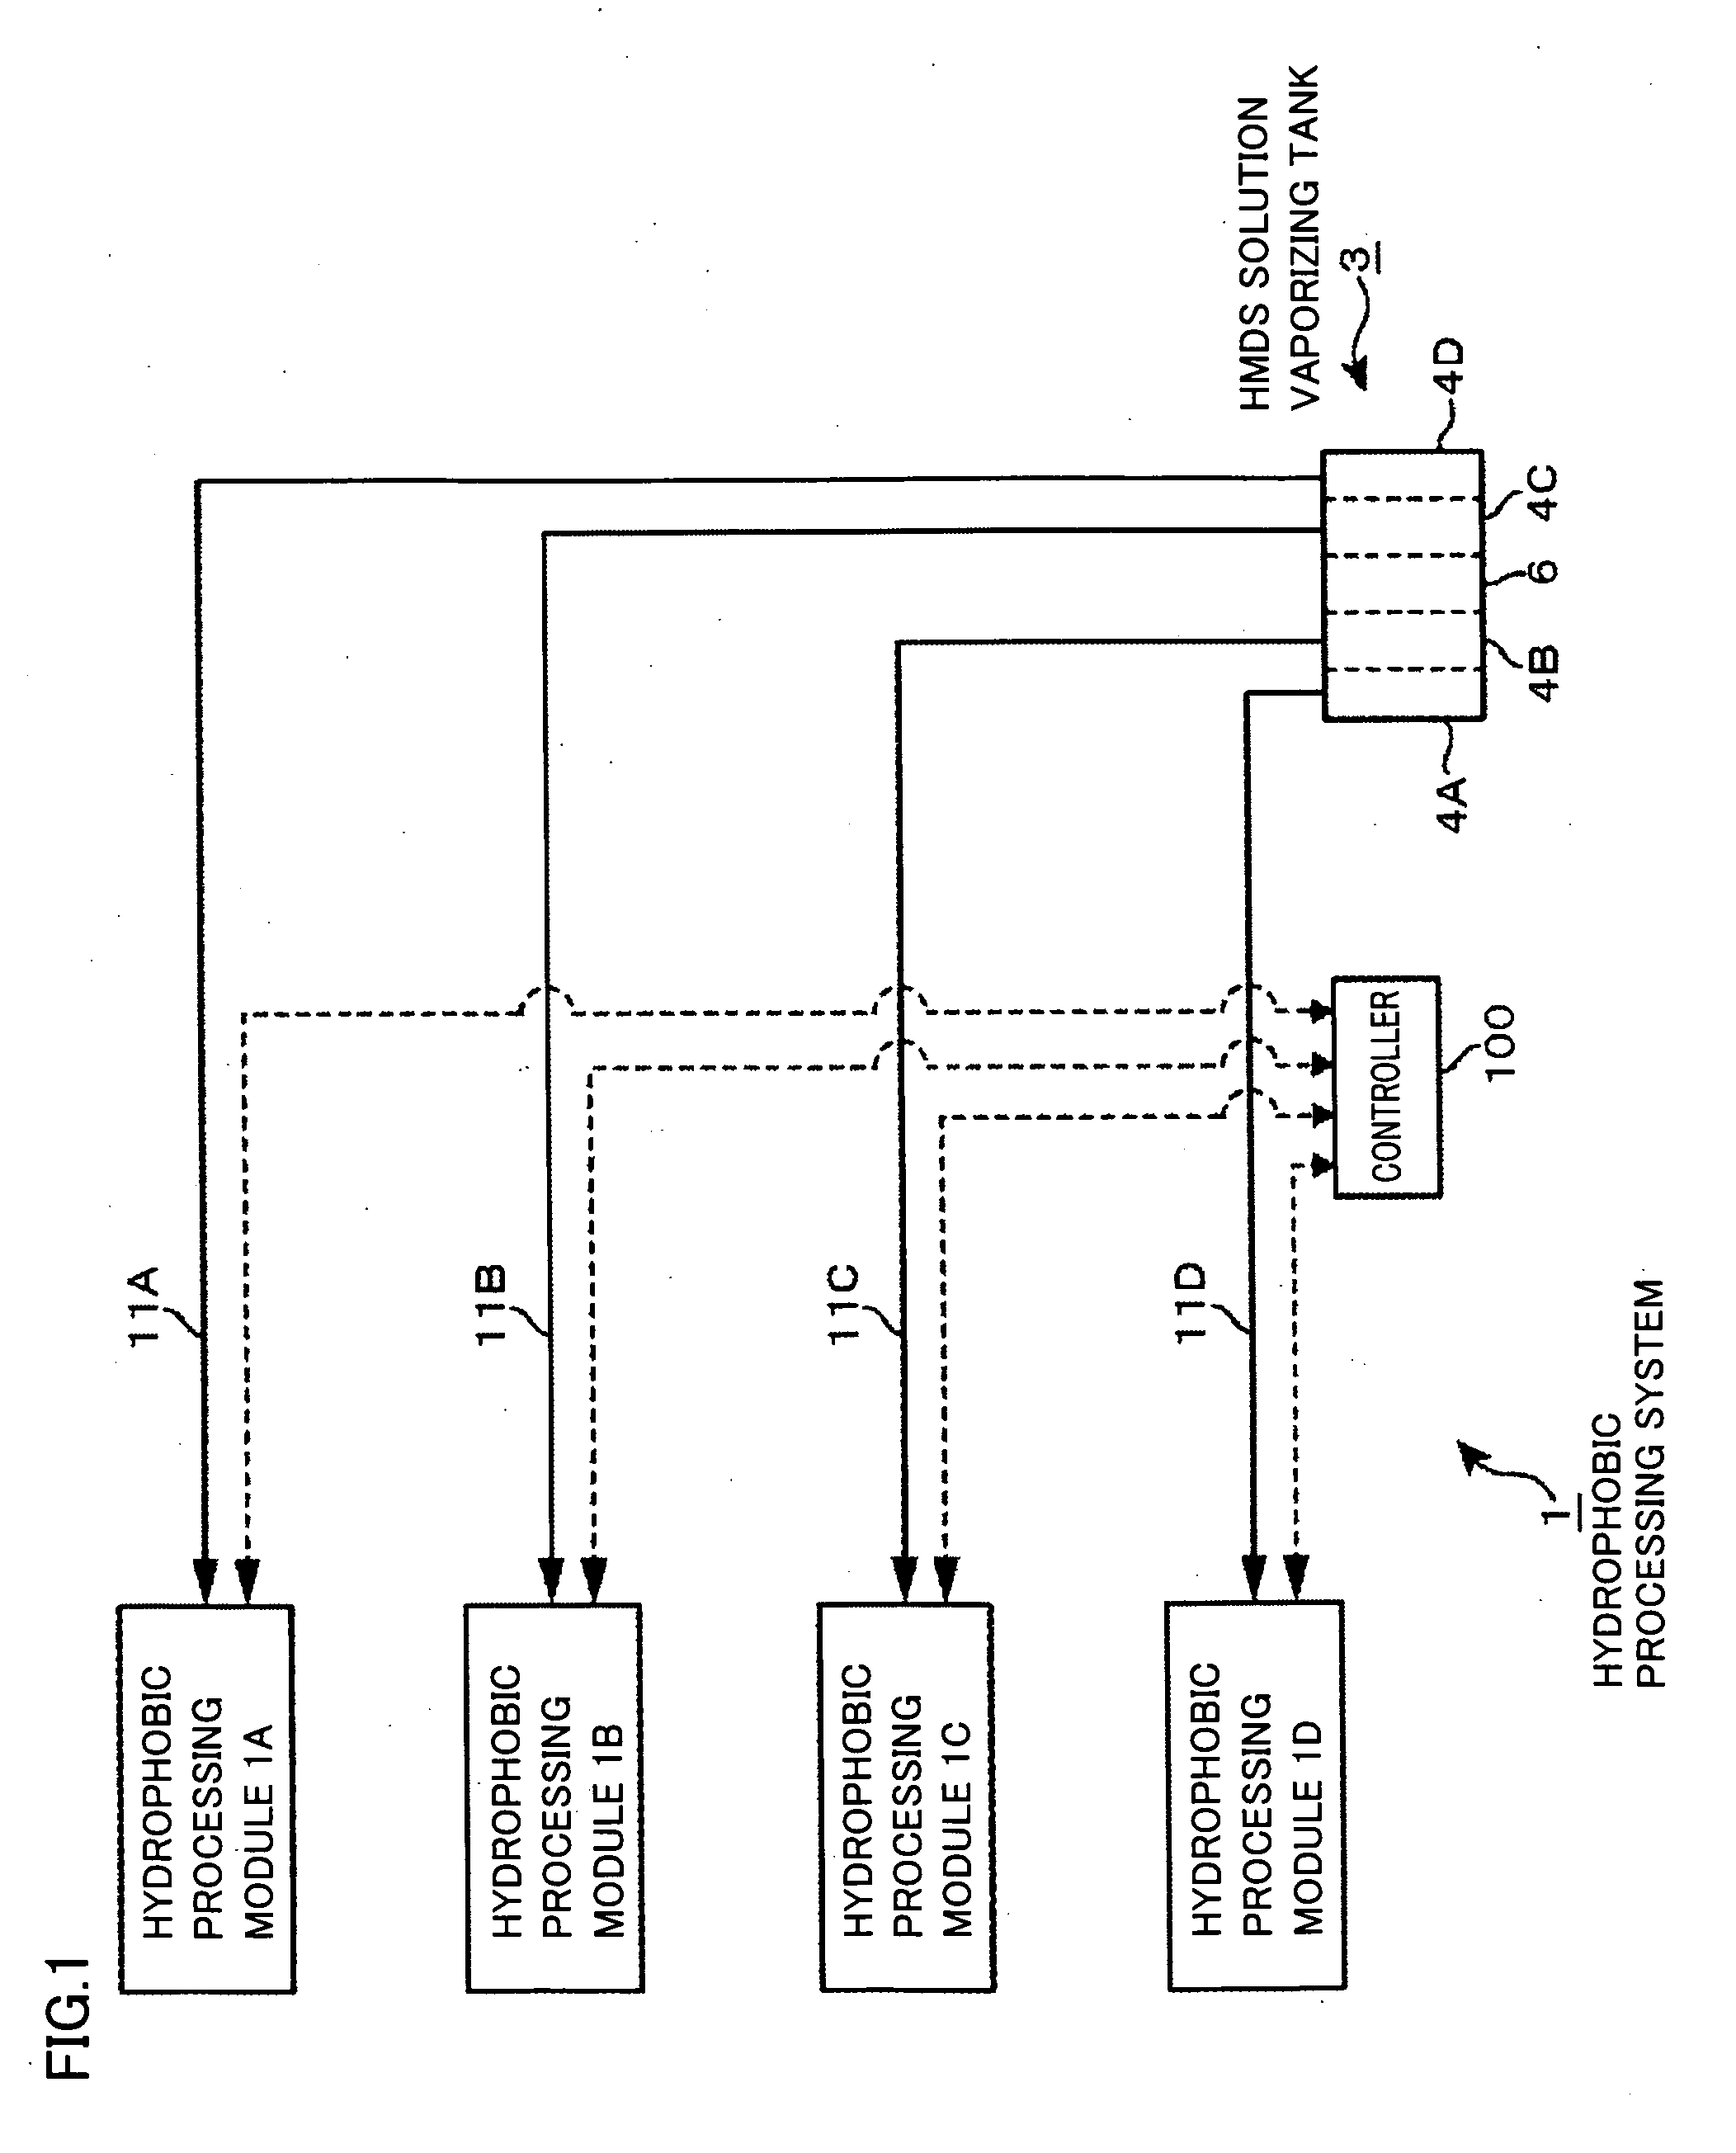 Chemical solution vaporizing tank and chemical solution treating system